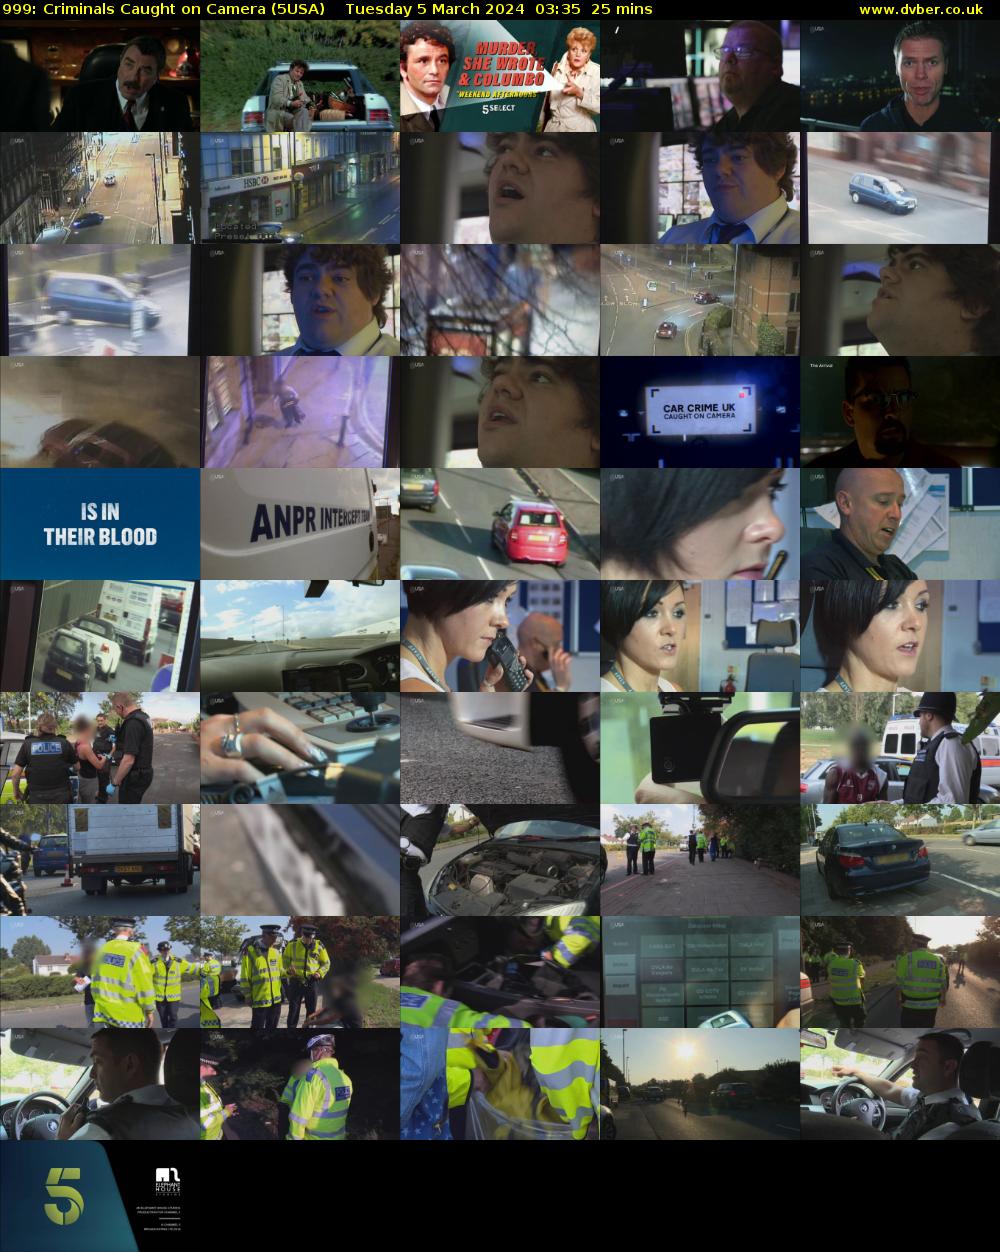 999: Criminals Caught on Camera (5USA) Tuesday 5 March 2024 03:35 - 04:00